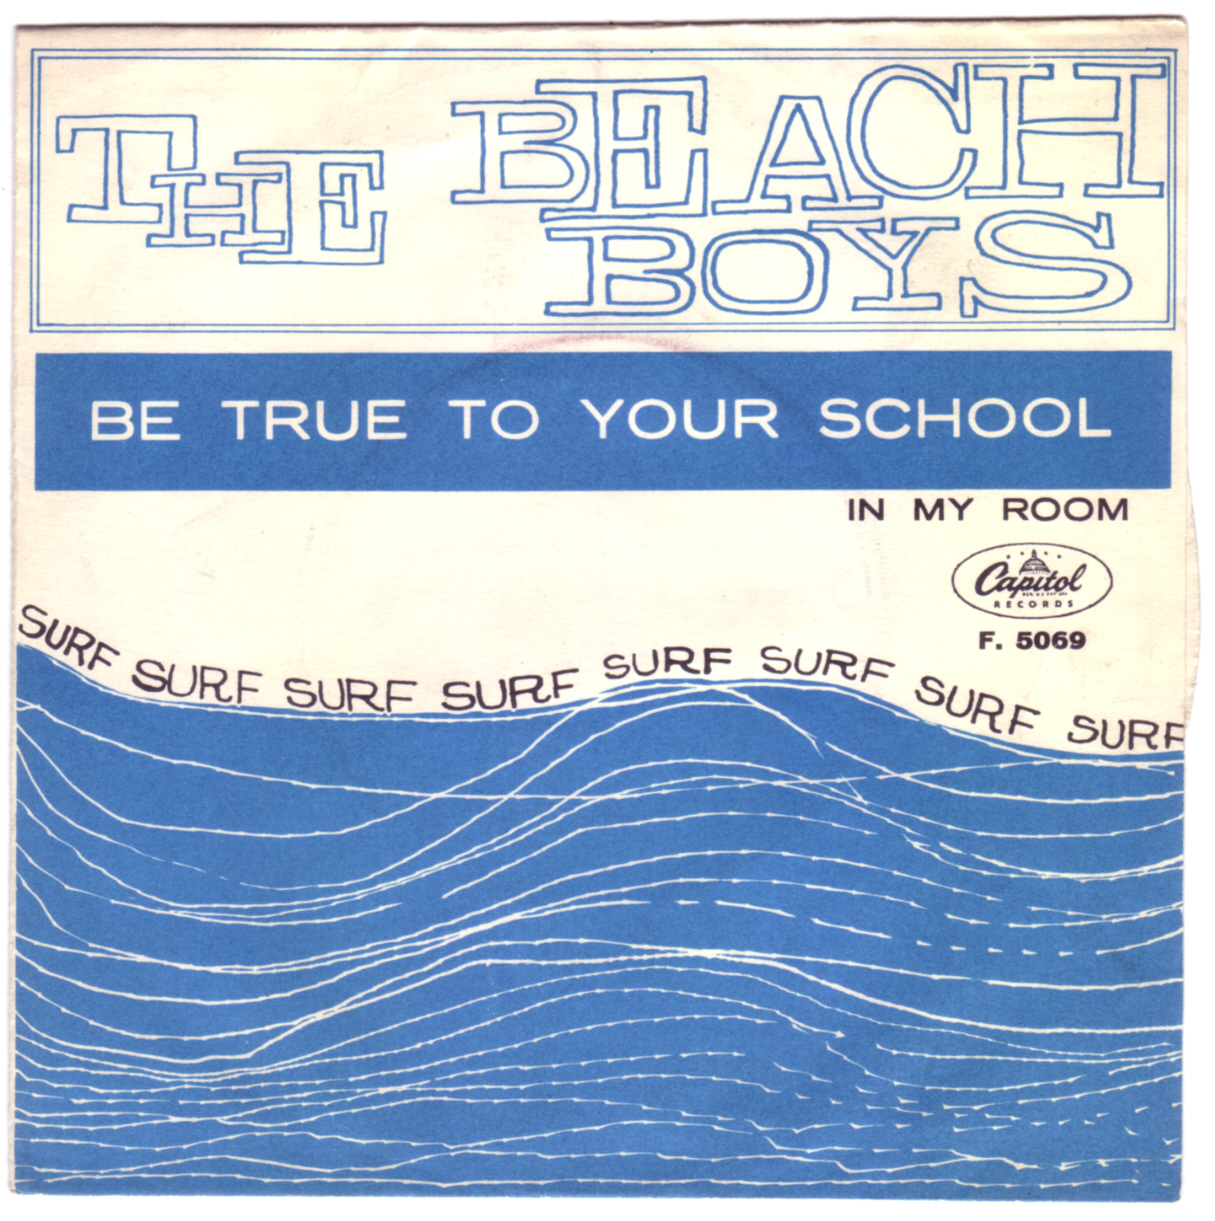 Image result for be true to your school beach boys